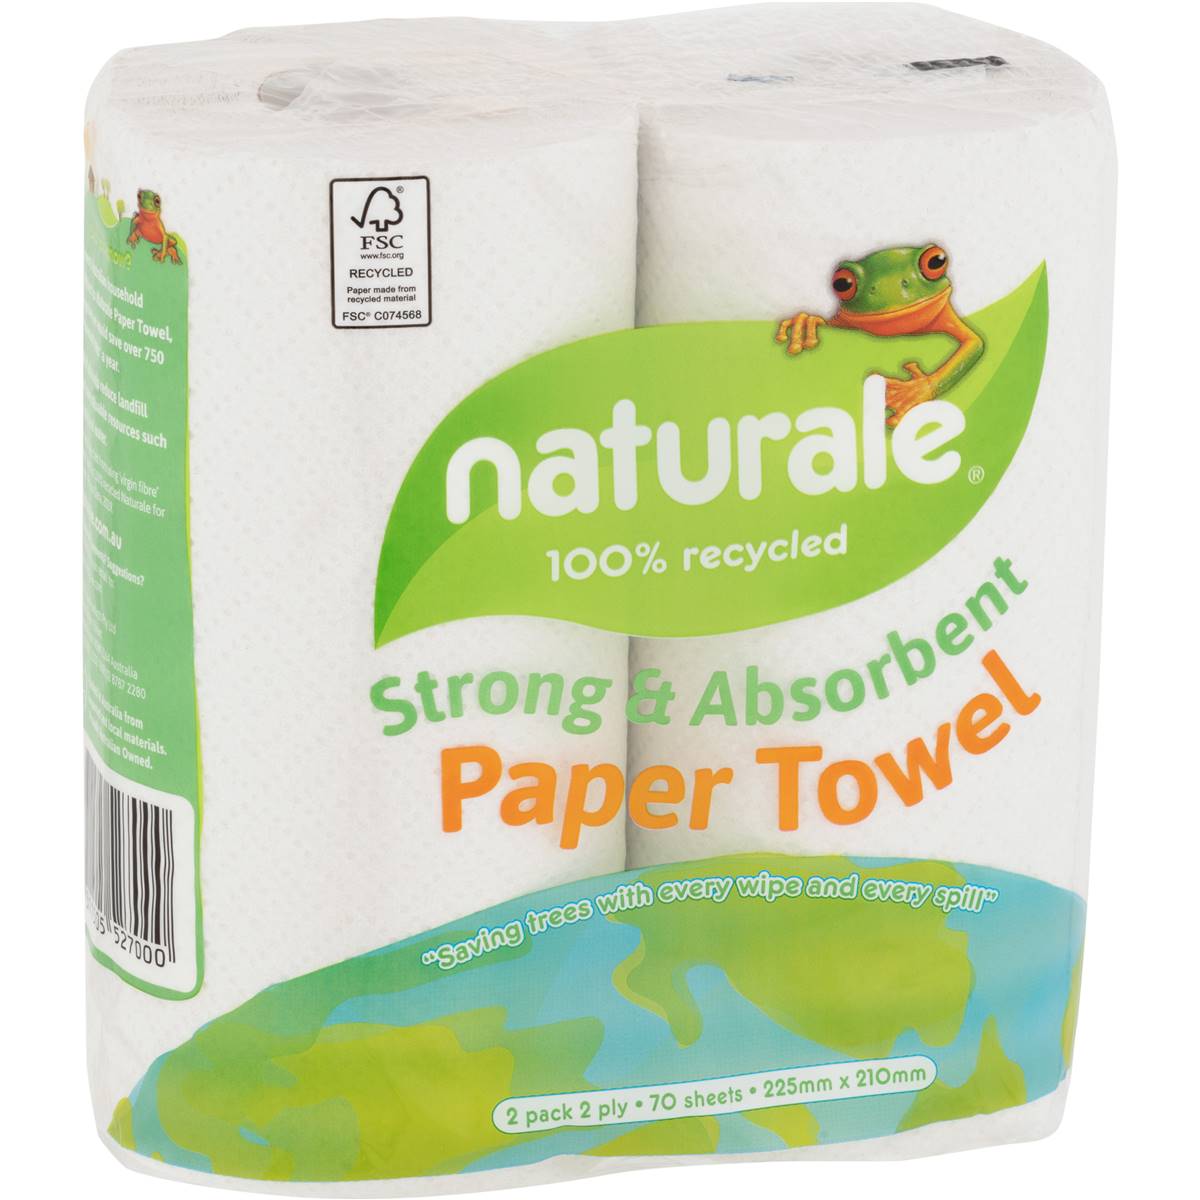 Naturale 100% Recycled Paper Towel 2 Ply 140 Sheets KT-527000ARK - Double Bay Hardware